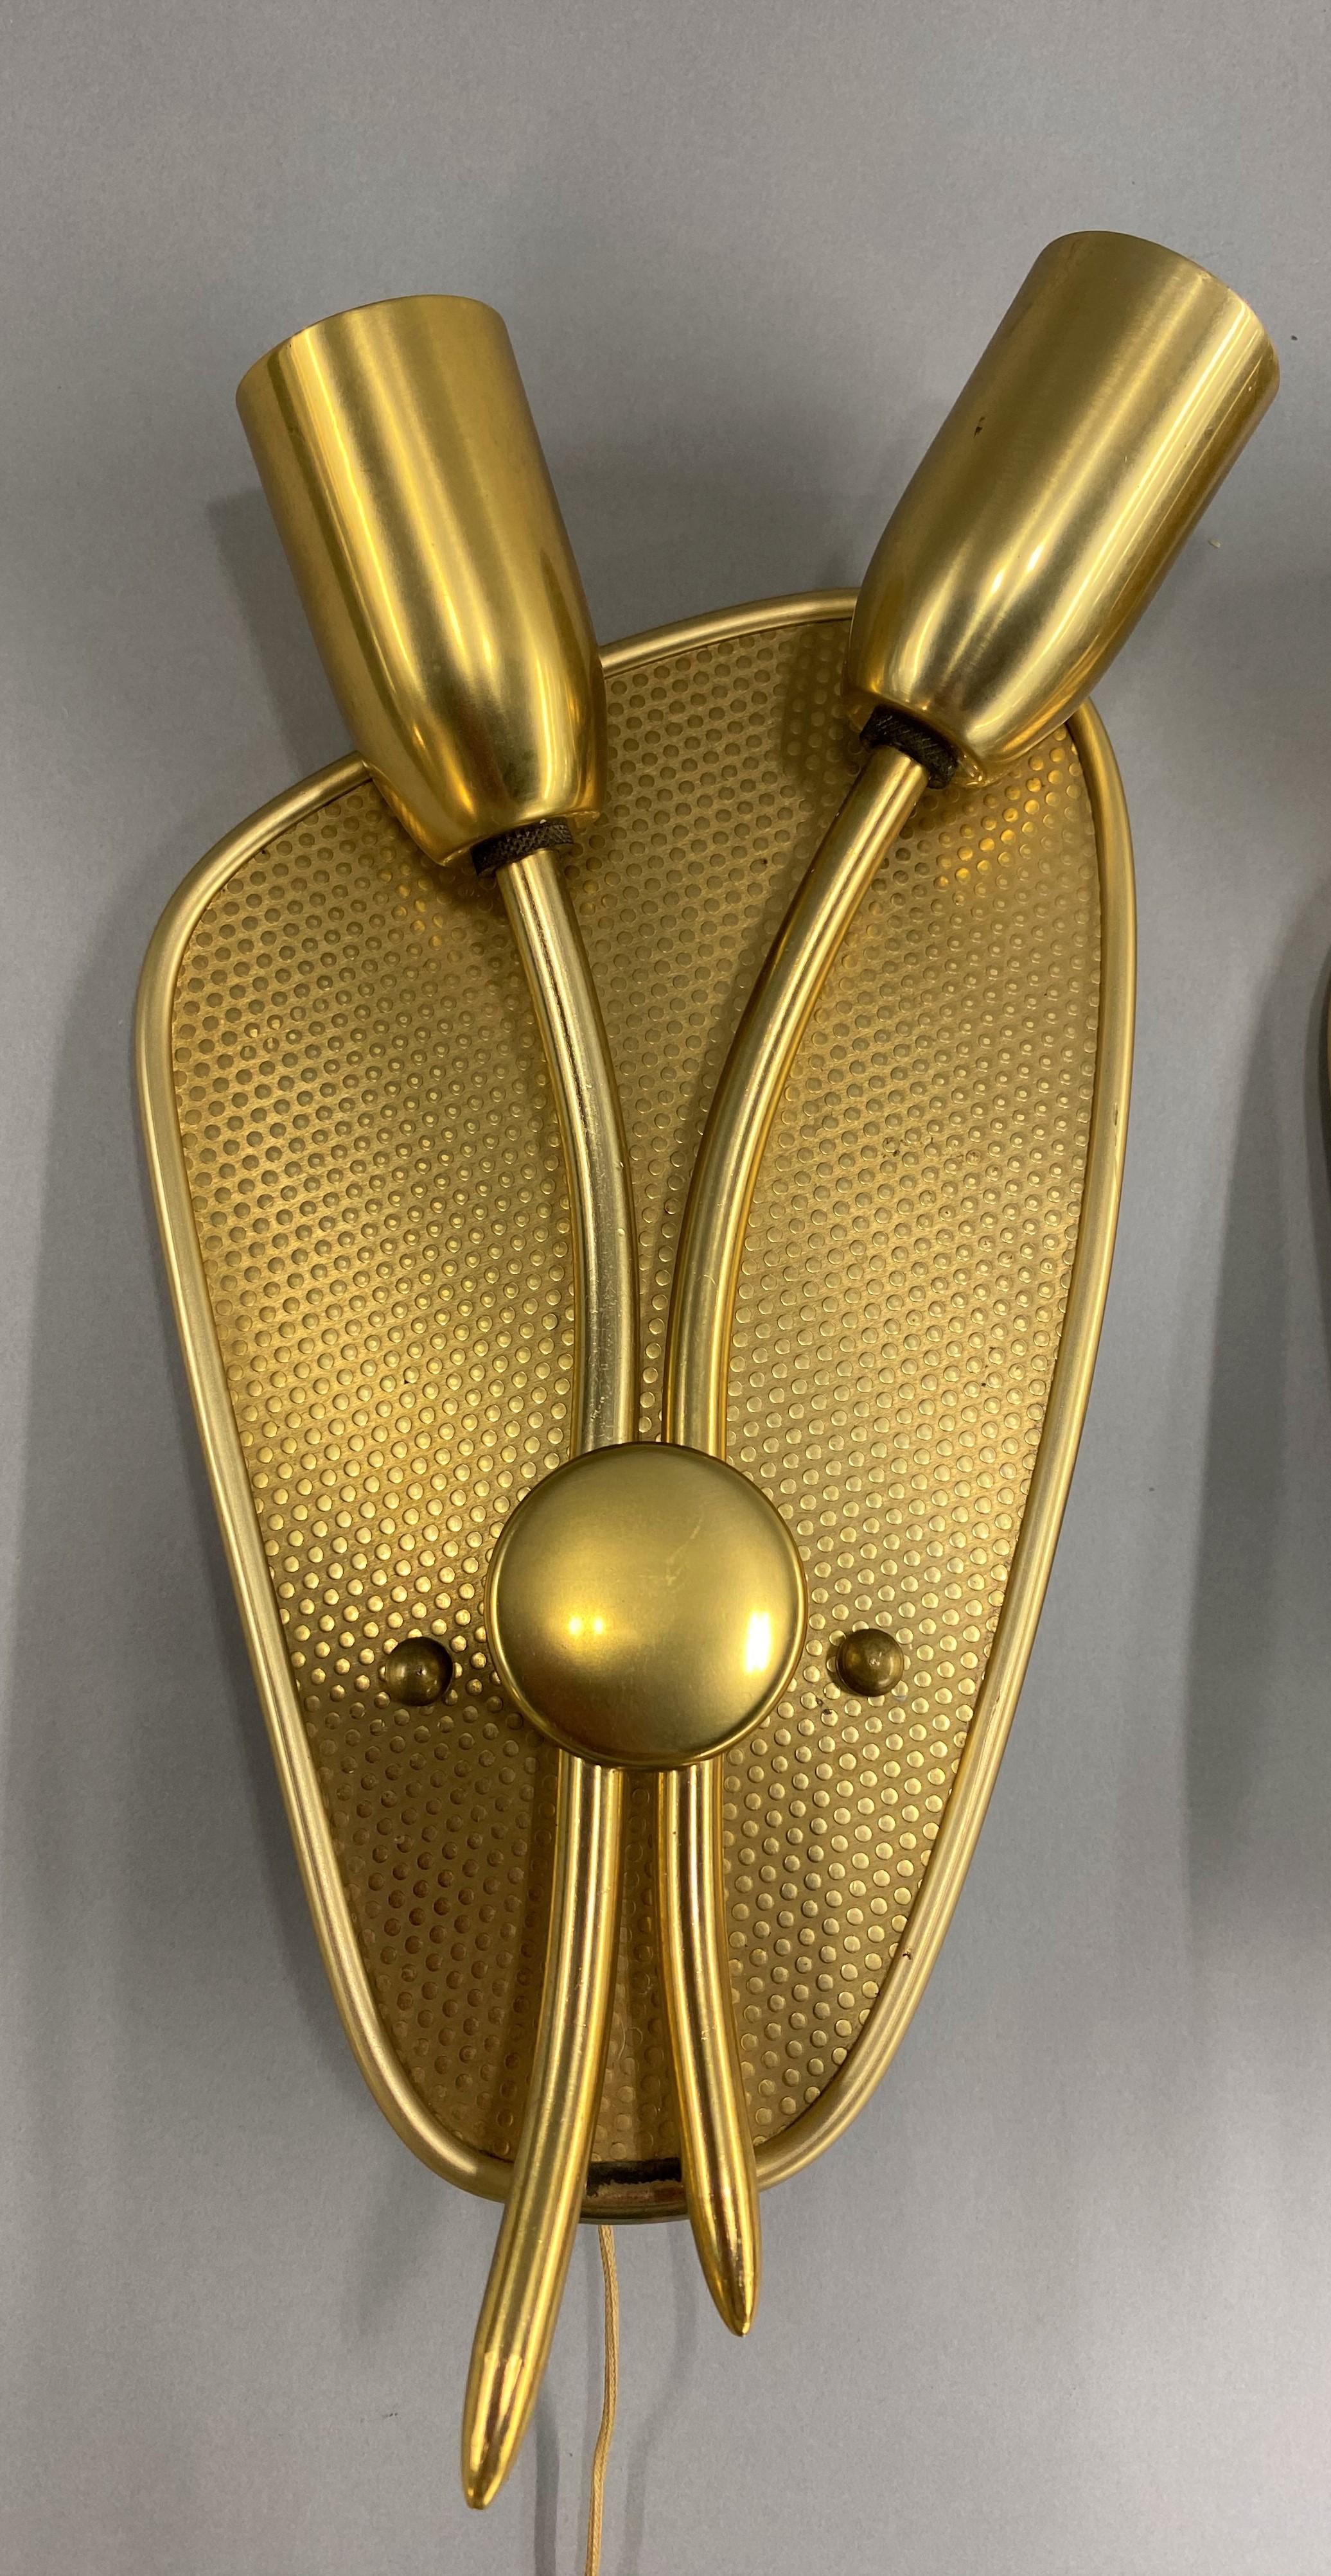 A wonderful pair of Classic Mid-Century Modern gilt metal tulip form two-light sconces, original pulls, in pristine condition, new old stock, with only a few minor surface imperfections, circa 1950s. Dimensions: 14.5 in H (including pull) x 5.5 in W